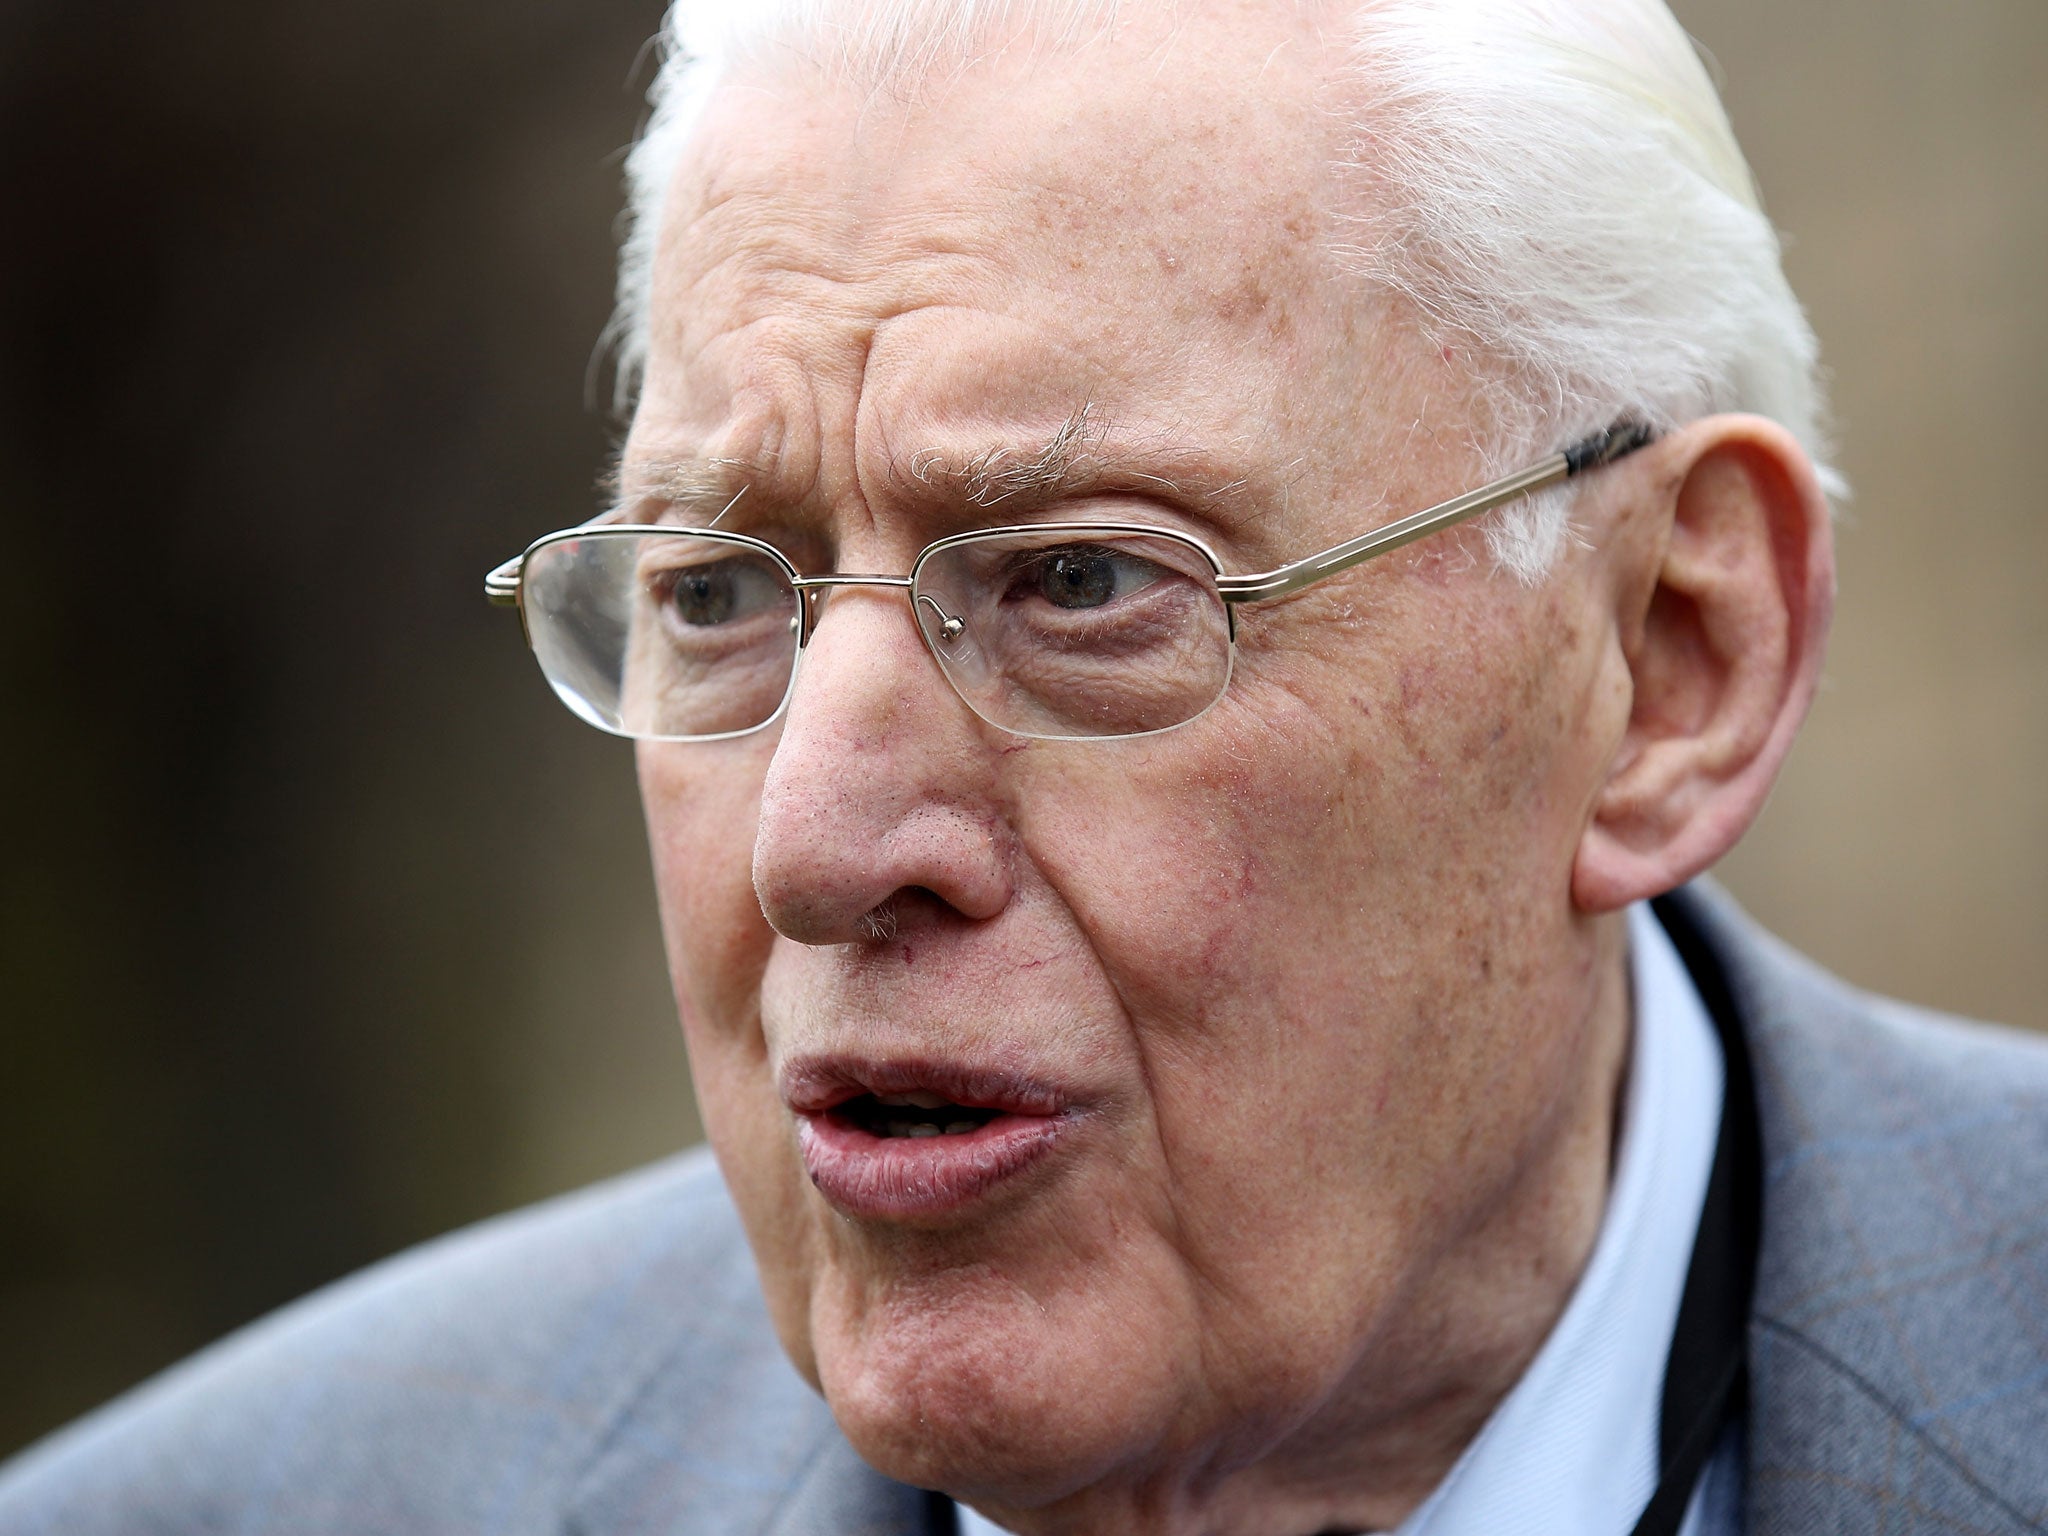 Rev Ian Paisley has moderated his views on certain issues in older age